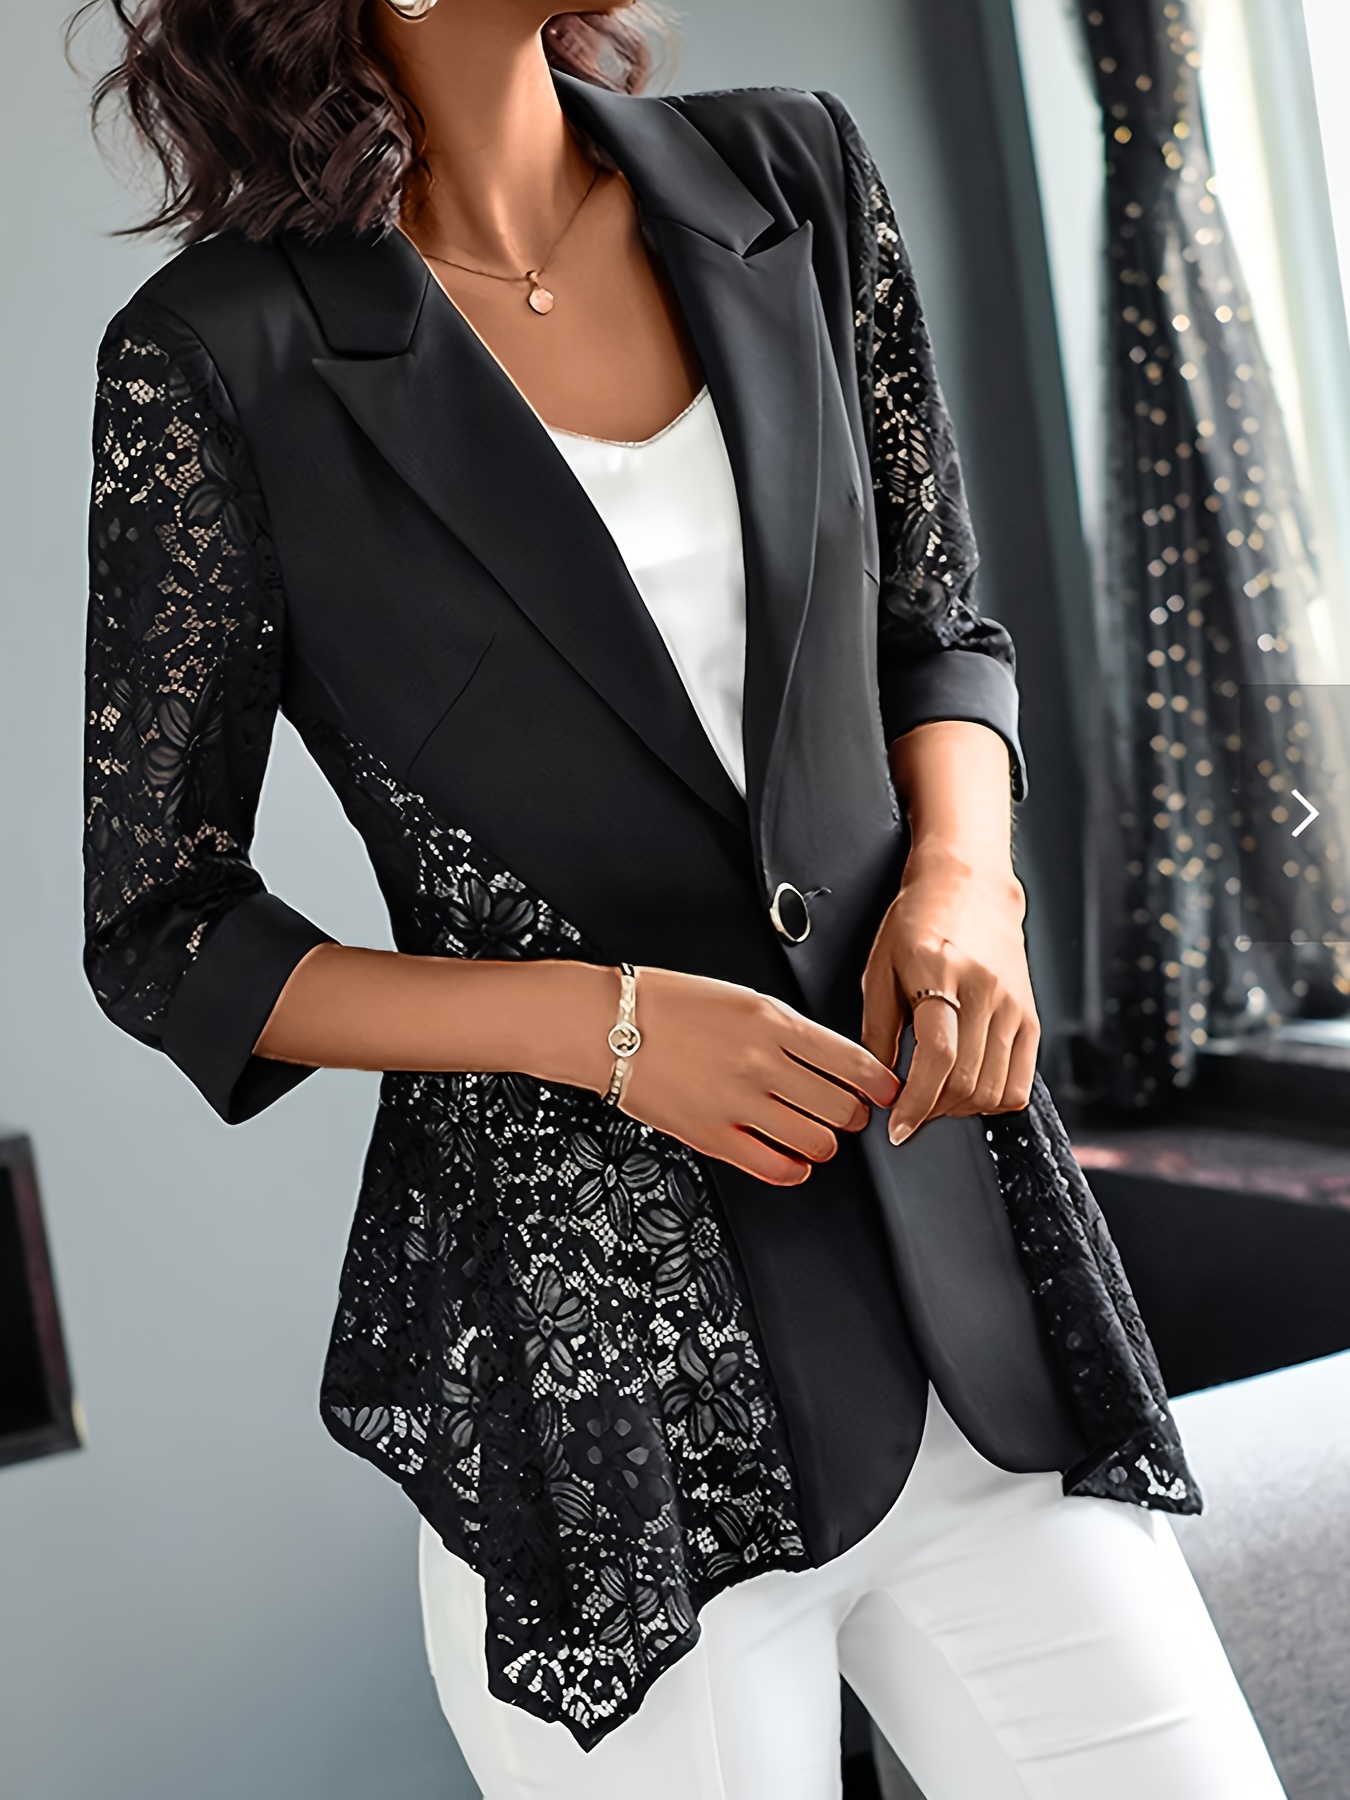 Solid Color Open Front Blazer, Elegant Lapel Neck Contrast Lace Single Button Long Sleeve Blazer For Every Day, Women s Clothing details 5